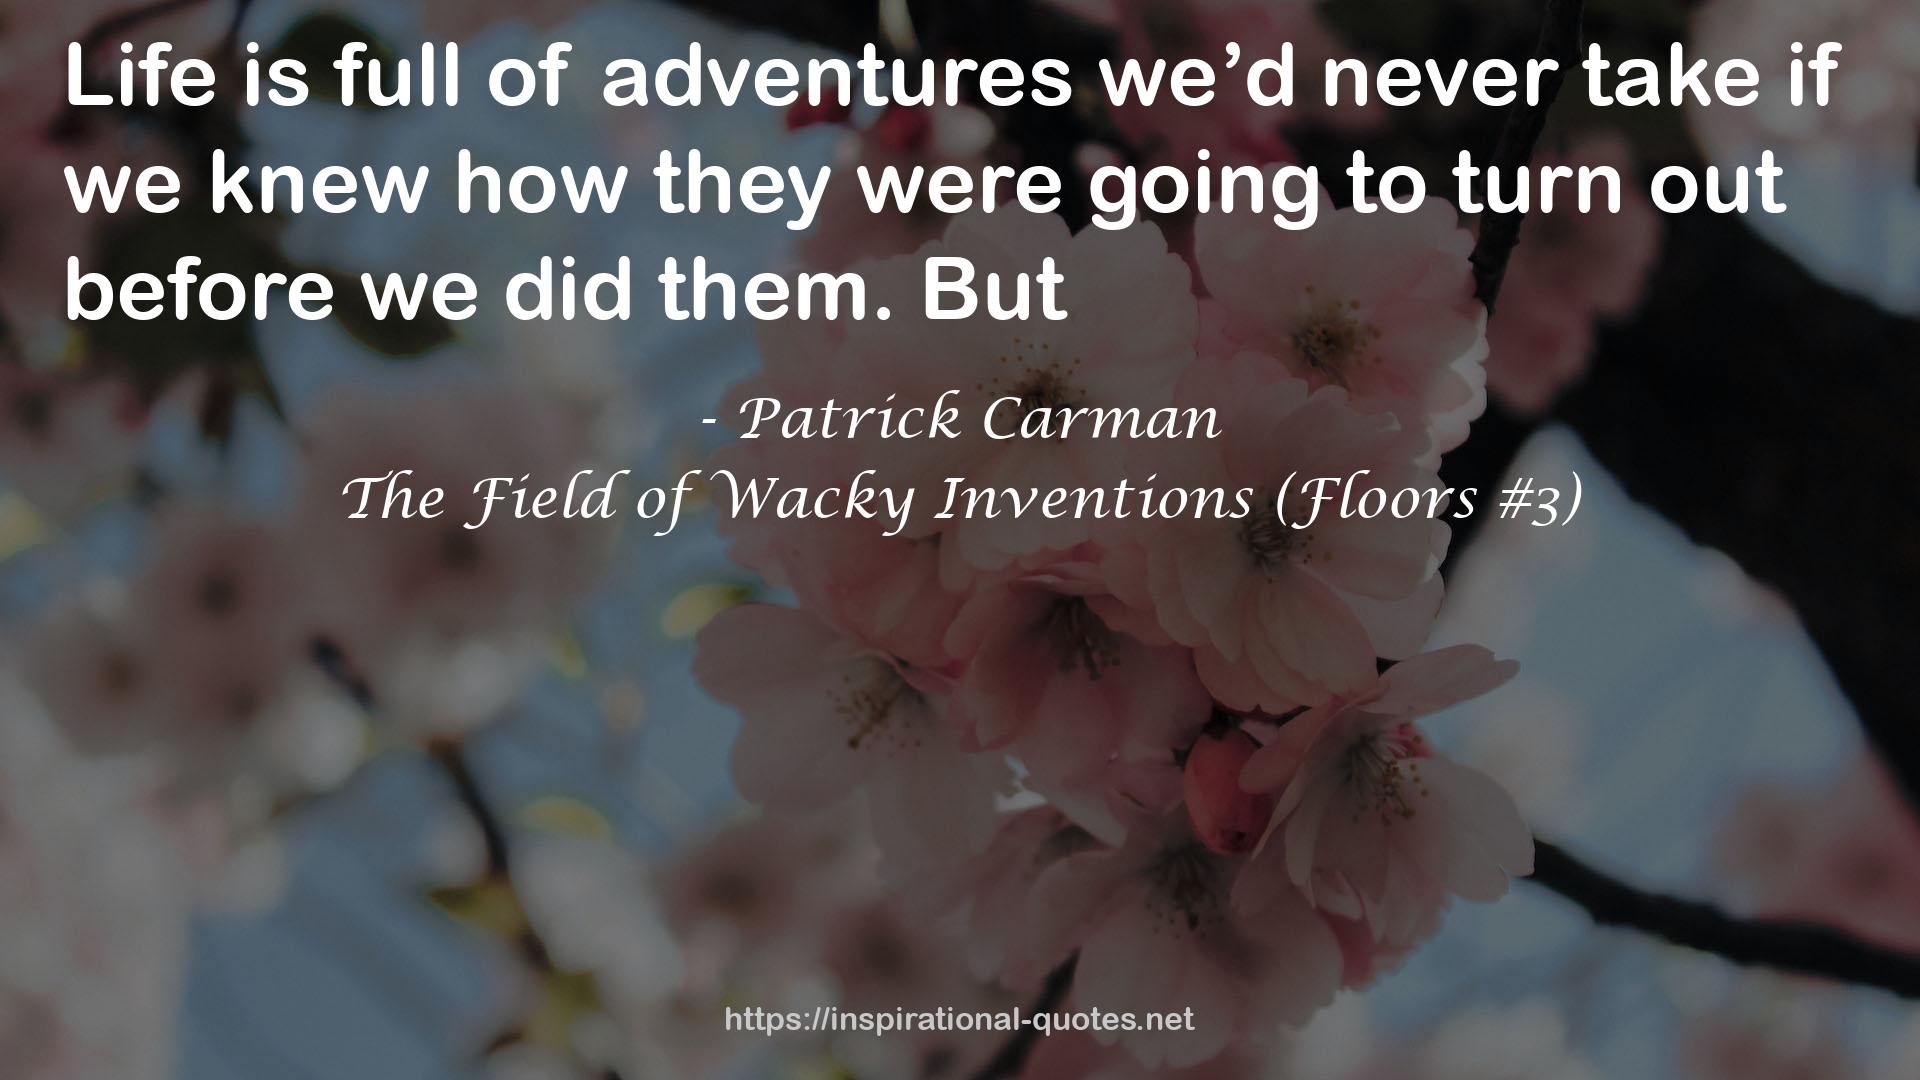 The Field of Wacky Inventions (Floors #3) QUOTES